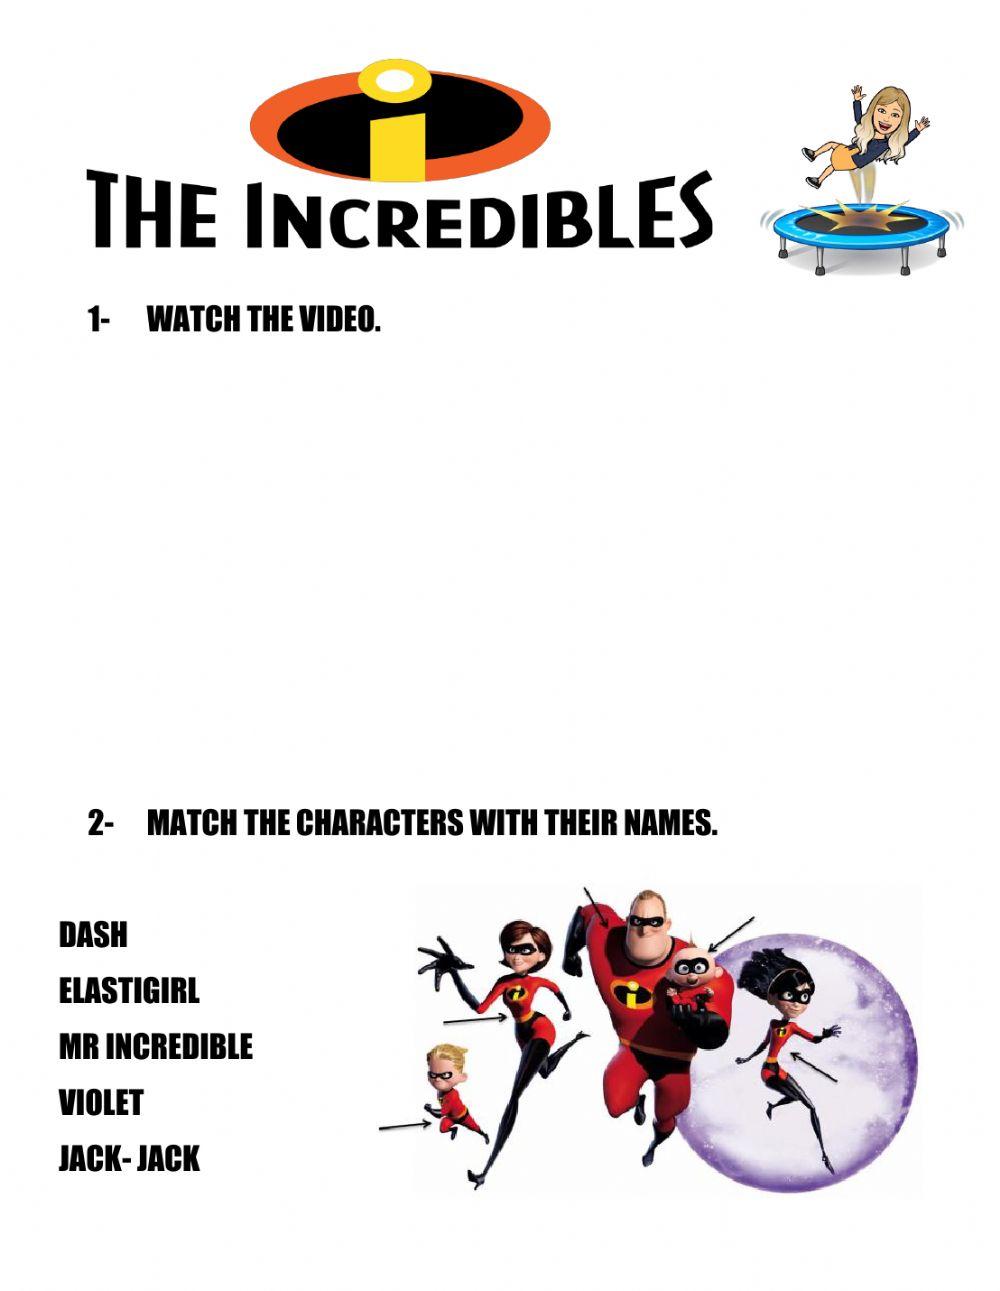 The incredibles - abilities